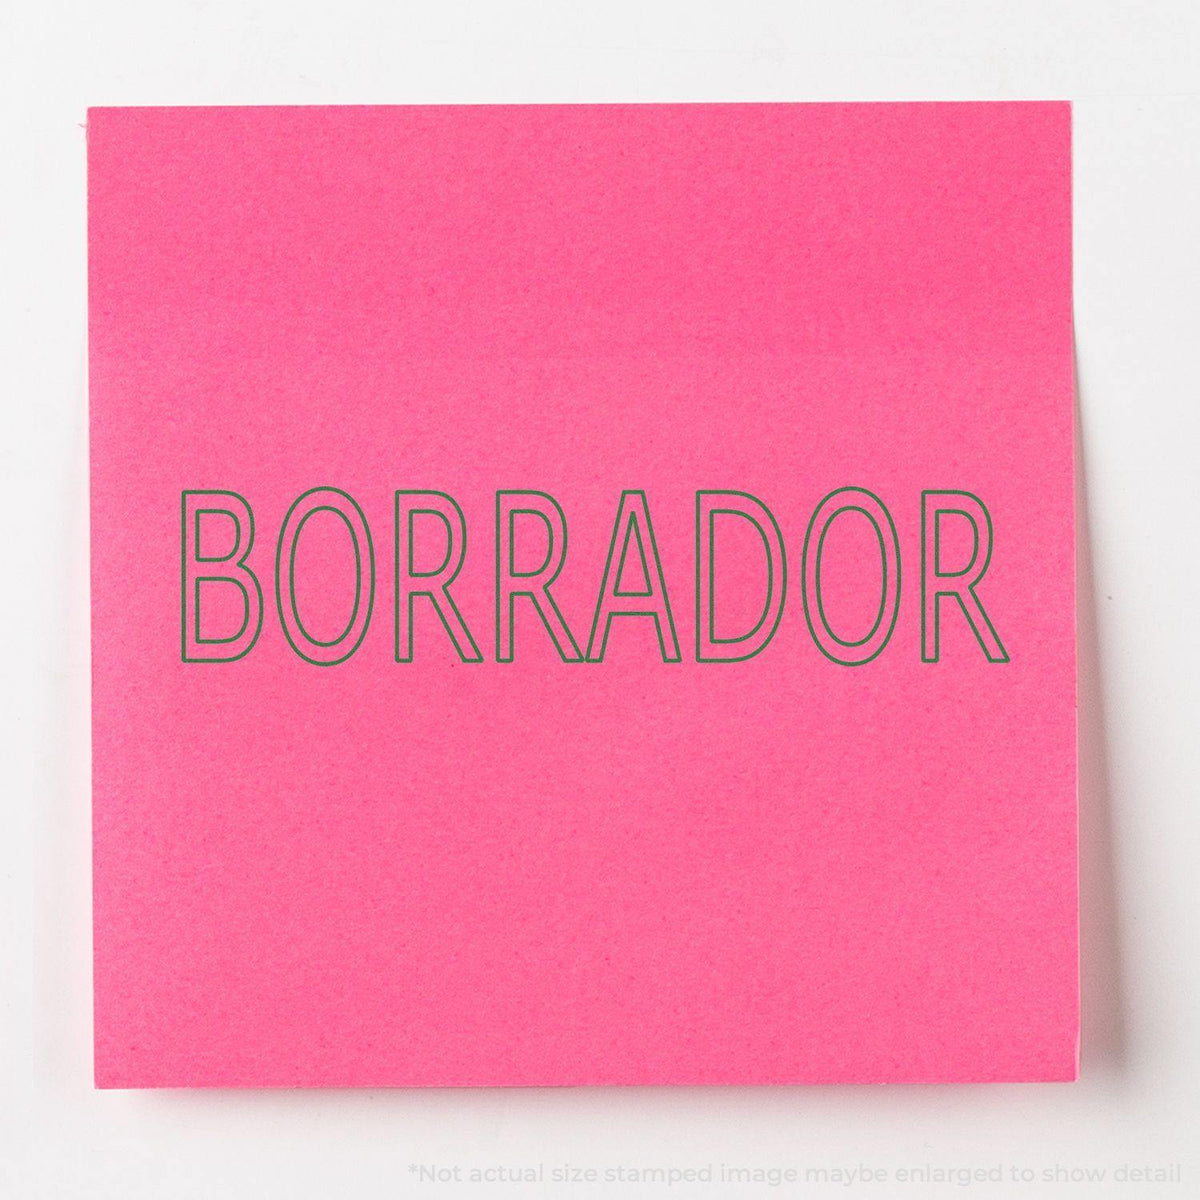 In Use Large Borrador Rubber Stamp Image